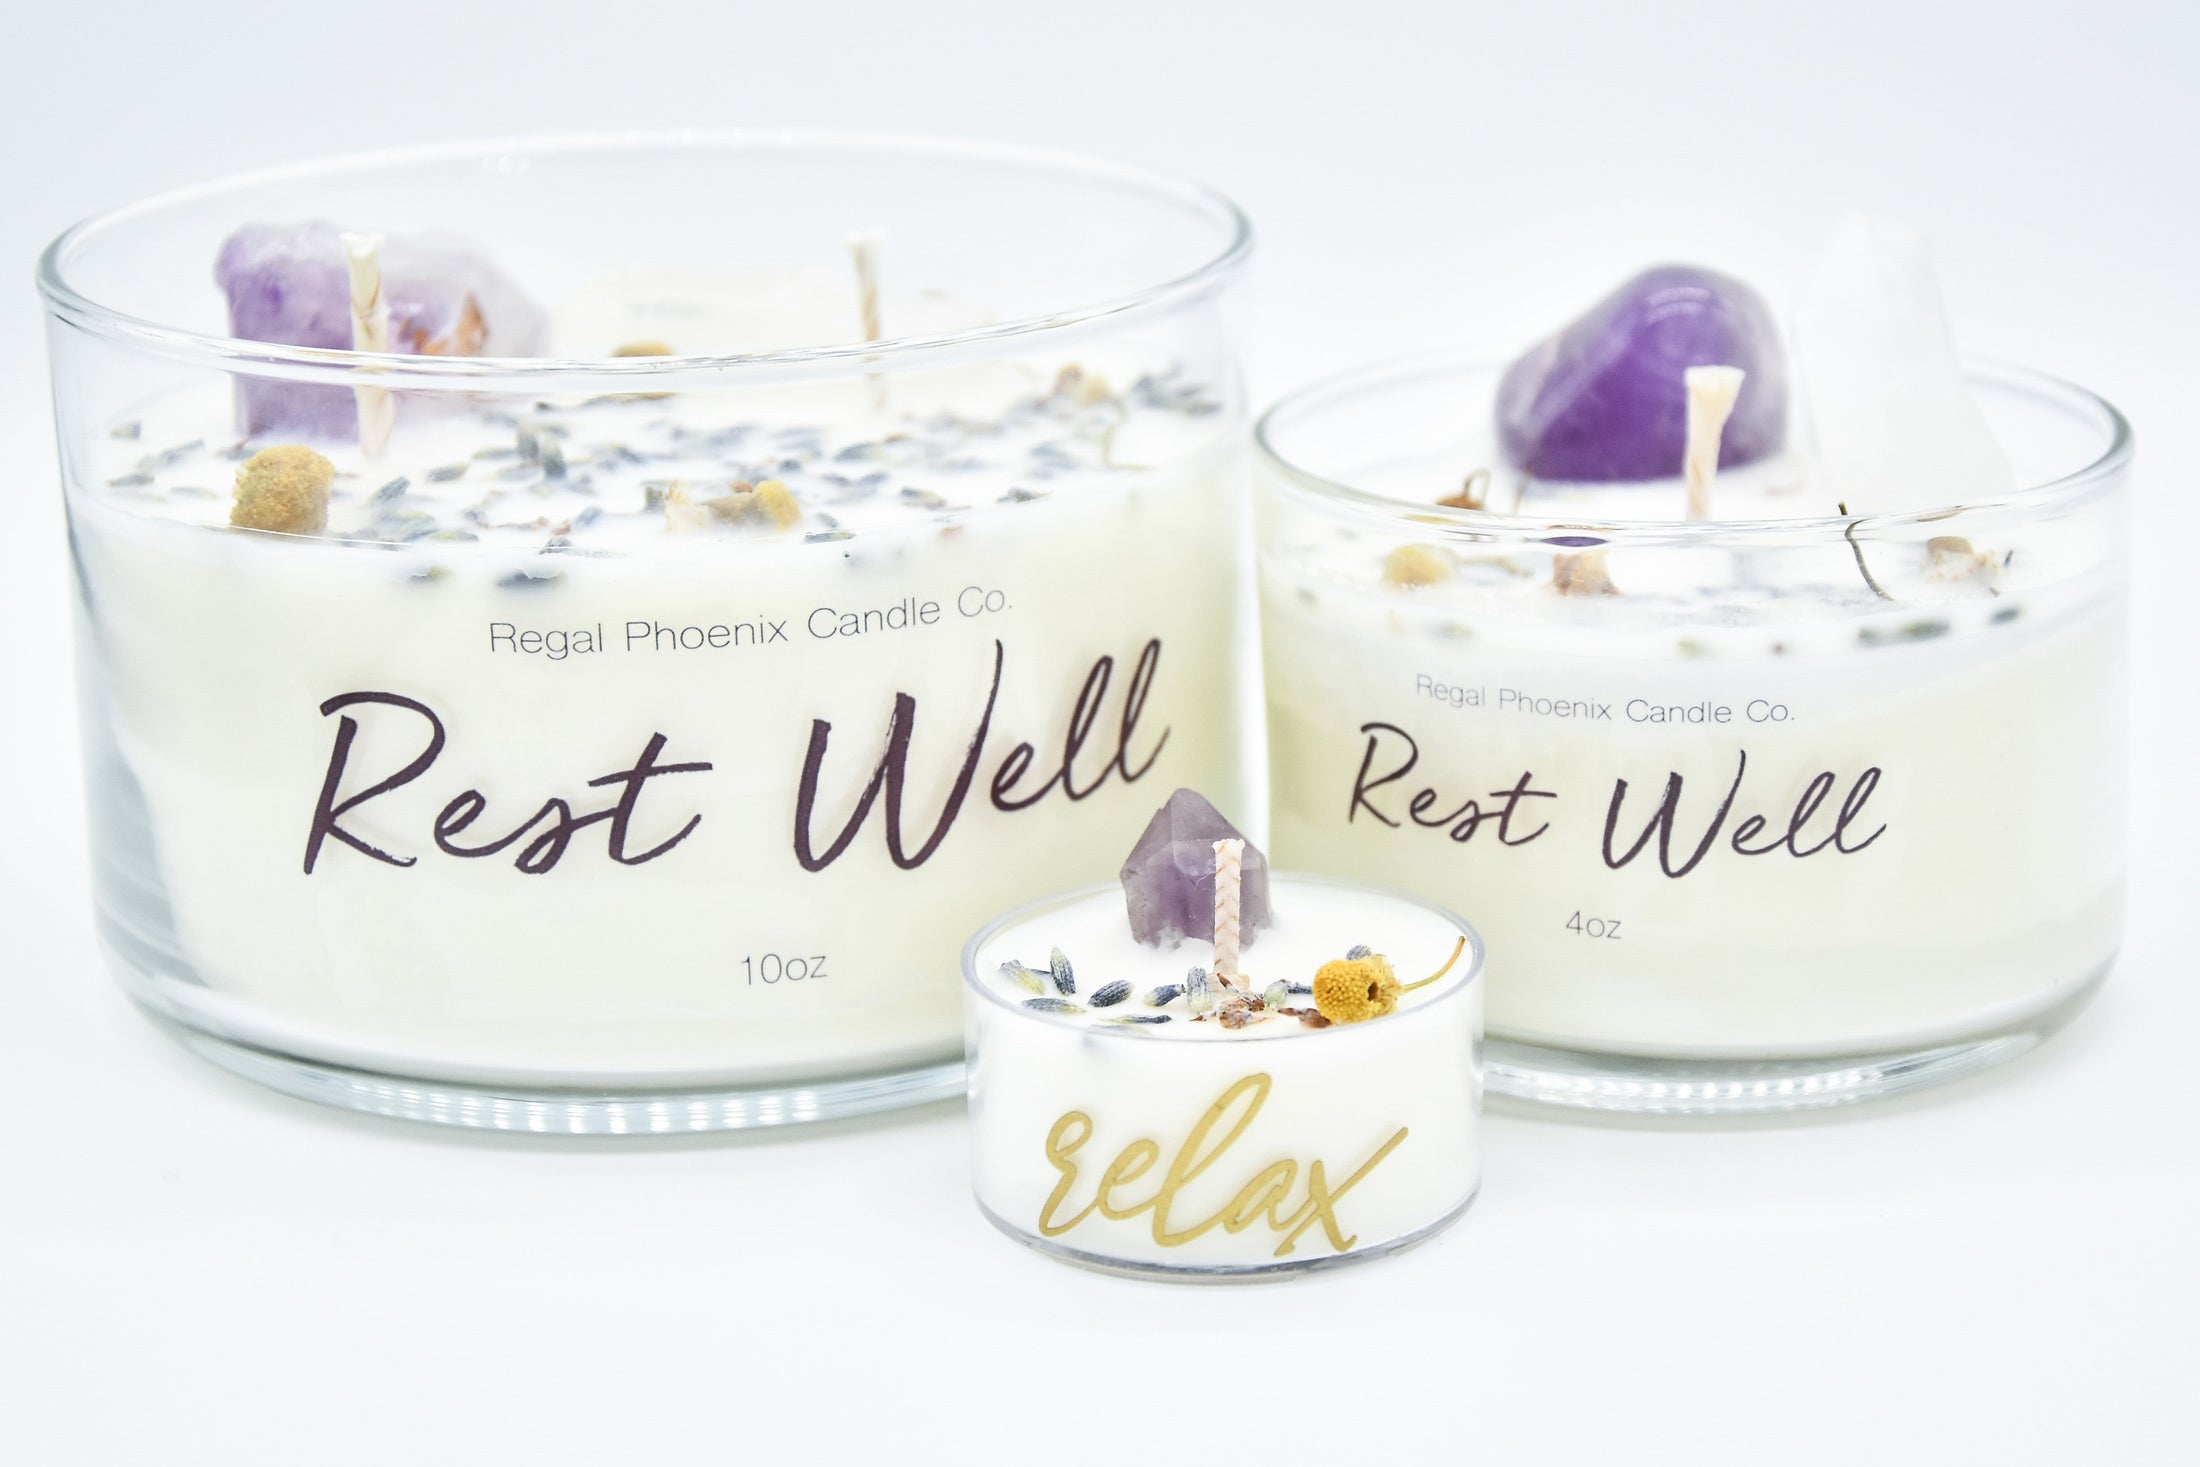 "Rest Well" Crystal Infused Soy Candle